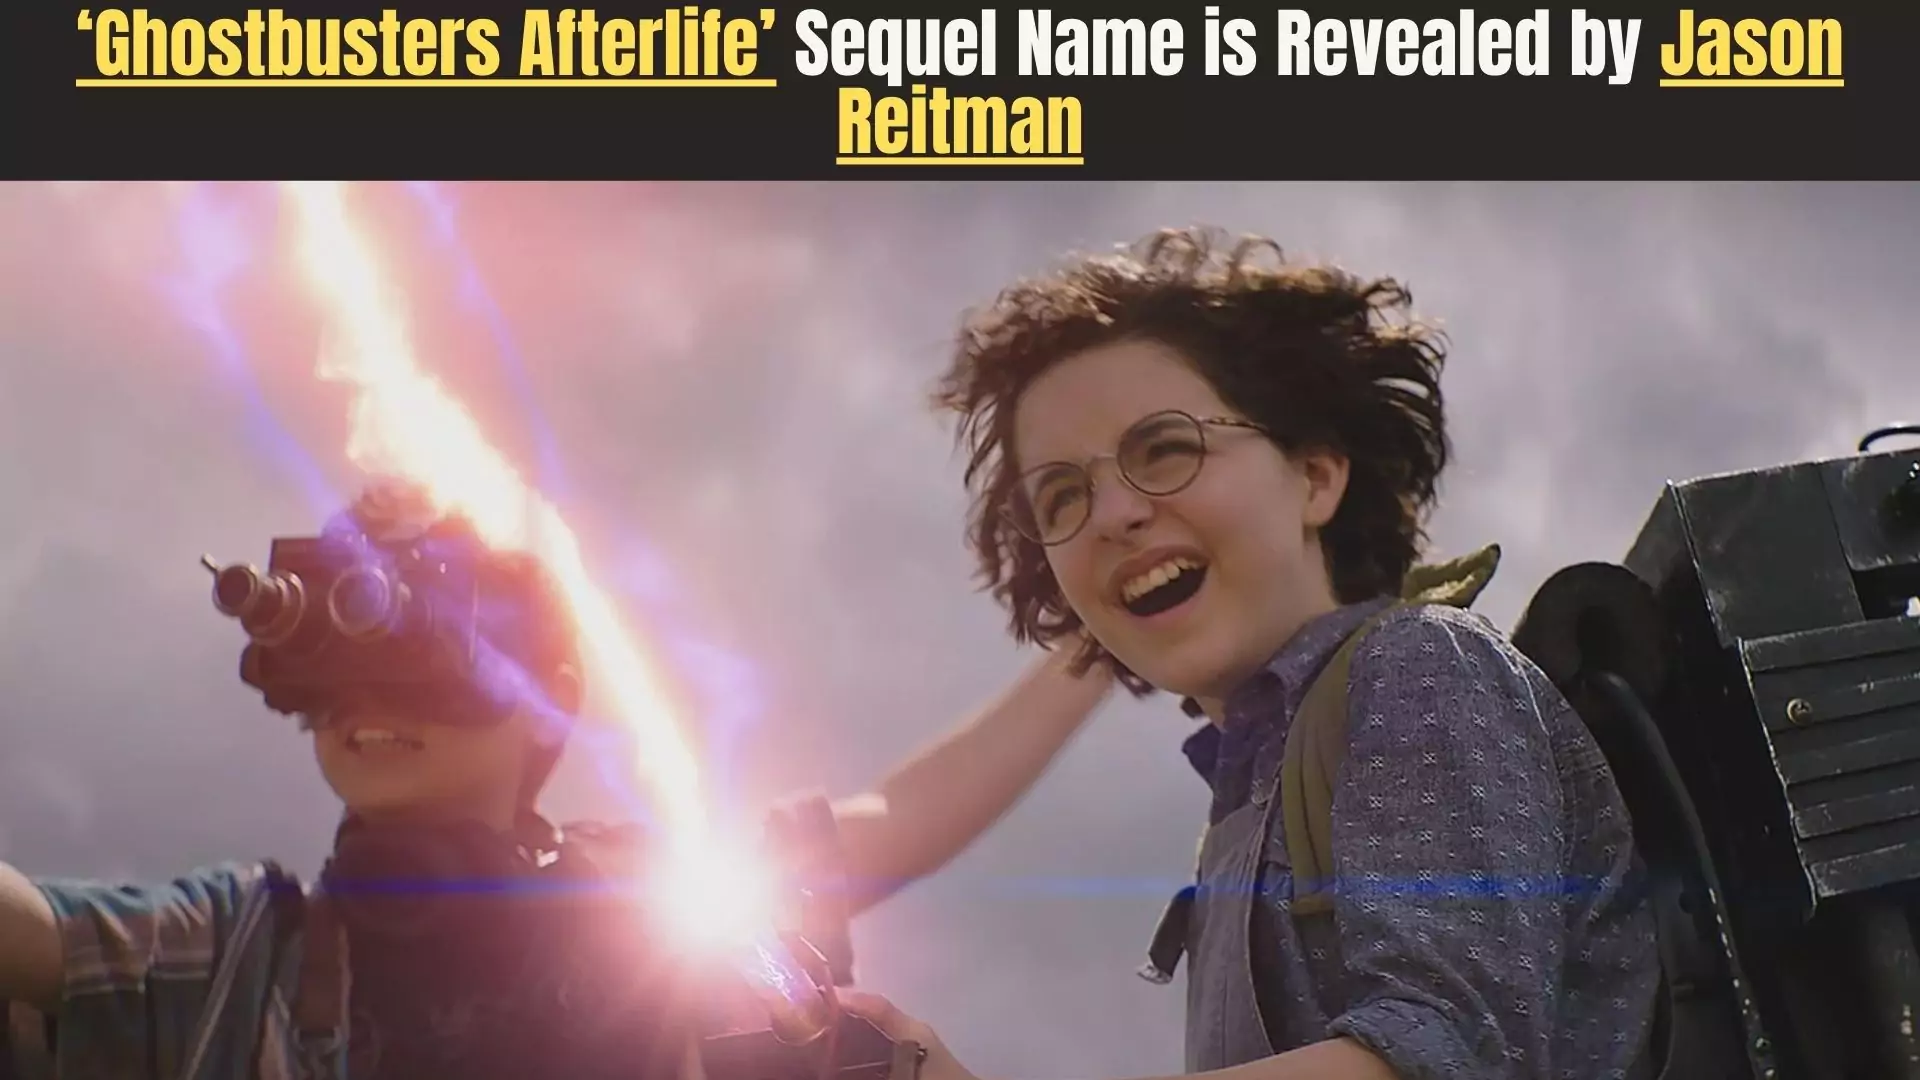 ‘Ghostbusters Afterlife’ Sequel Name is Revealed by Jason Reitman